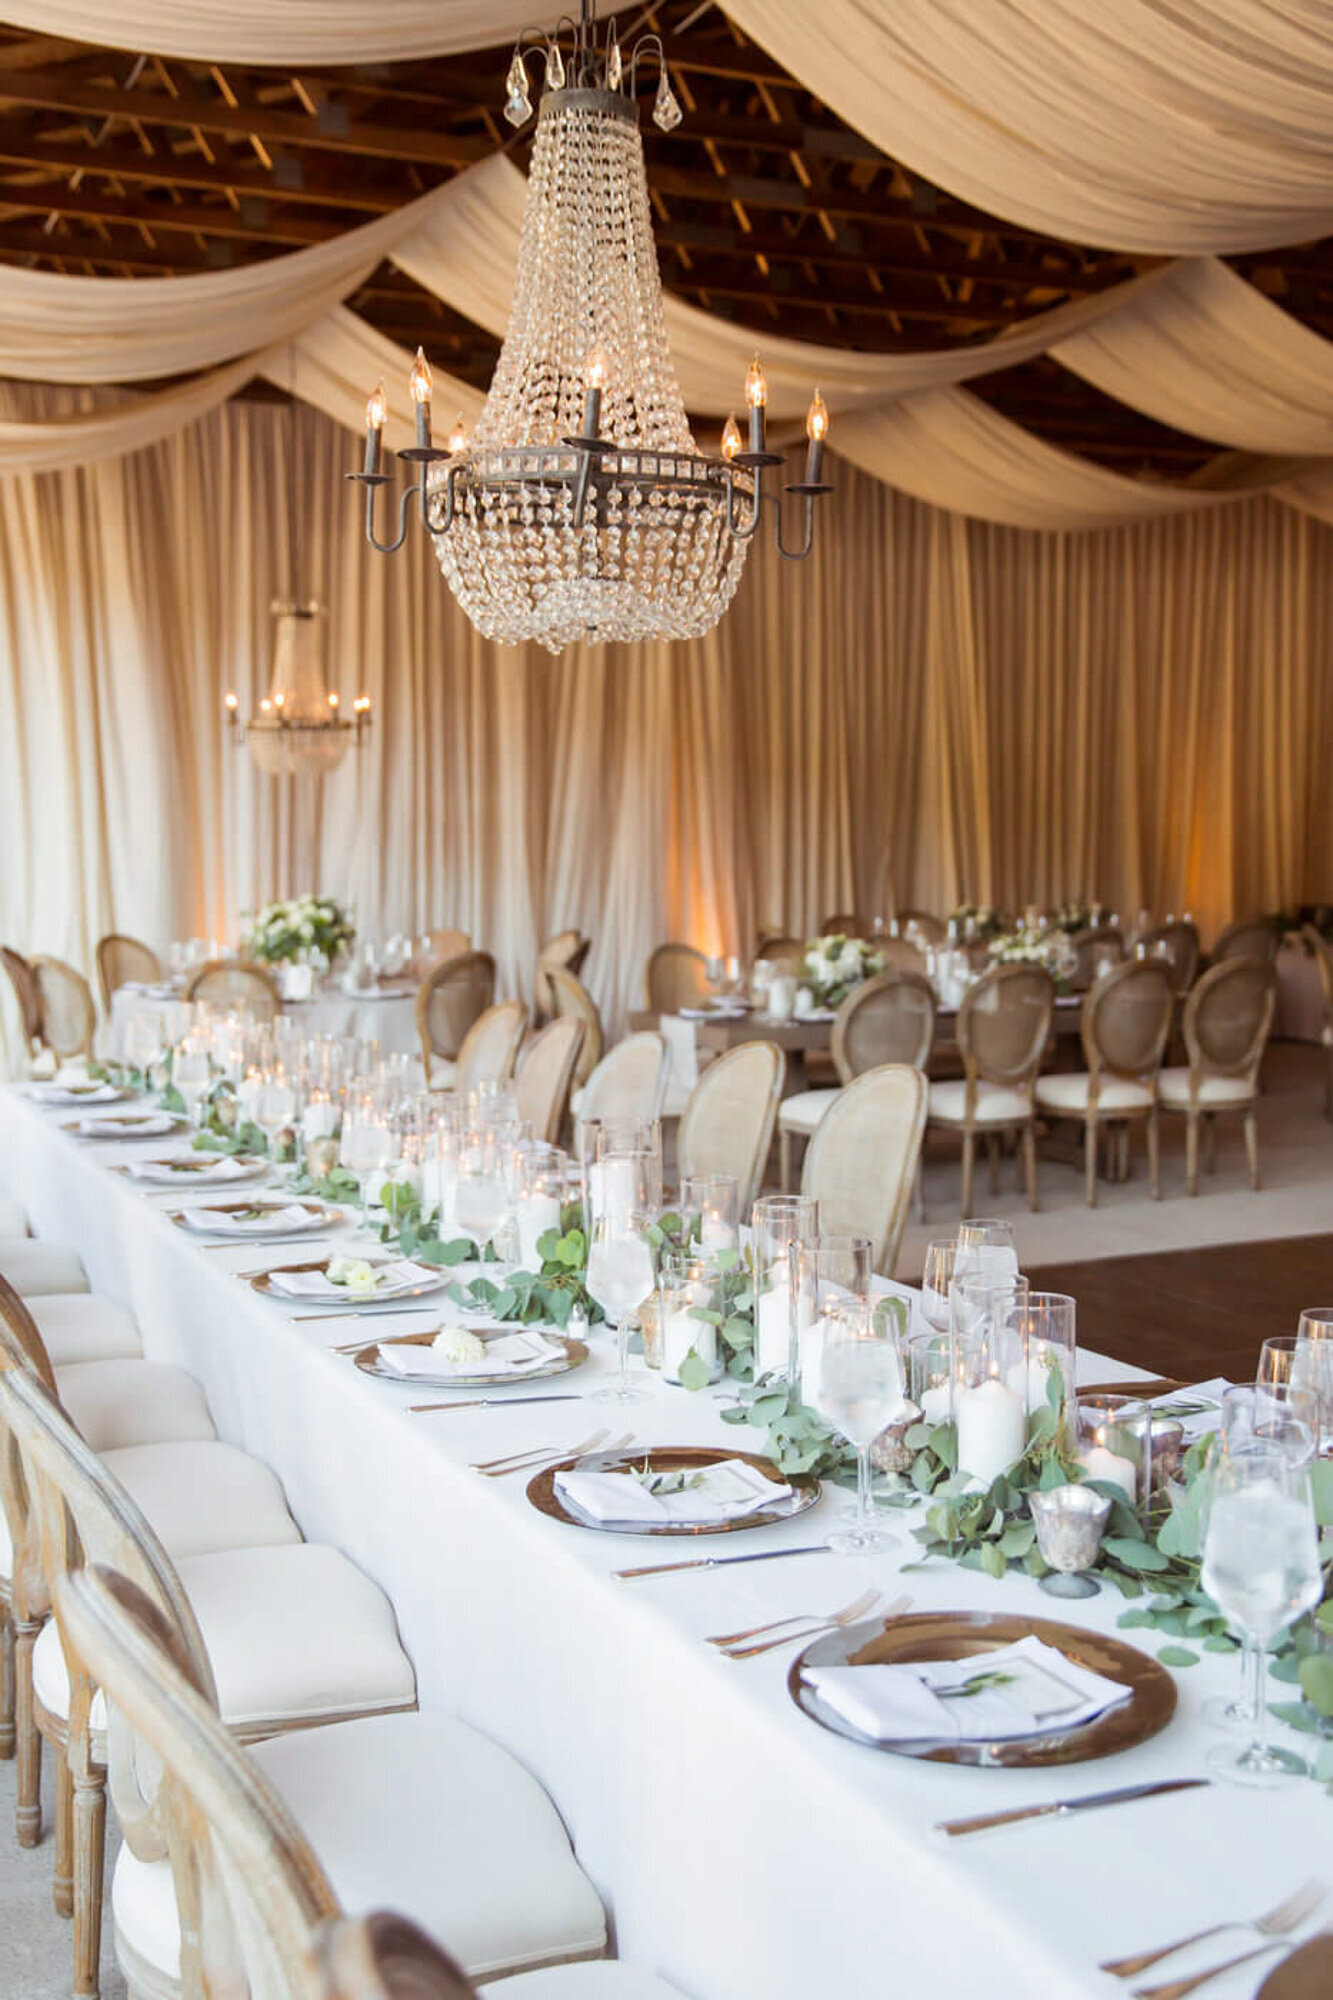 Elegant wedding set-up, tables  and chairs with floral centerpieces and a grand chandelier